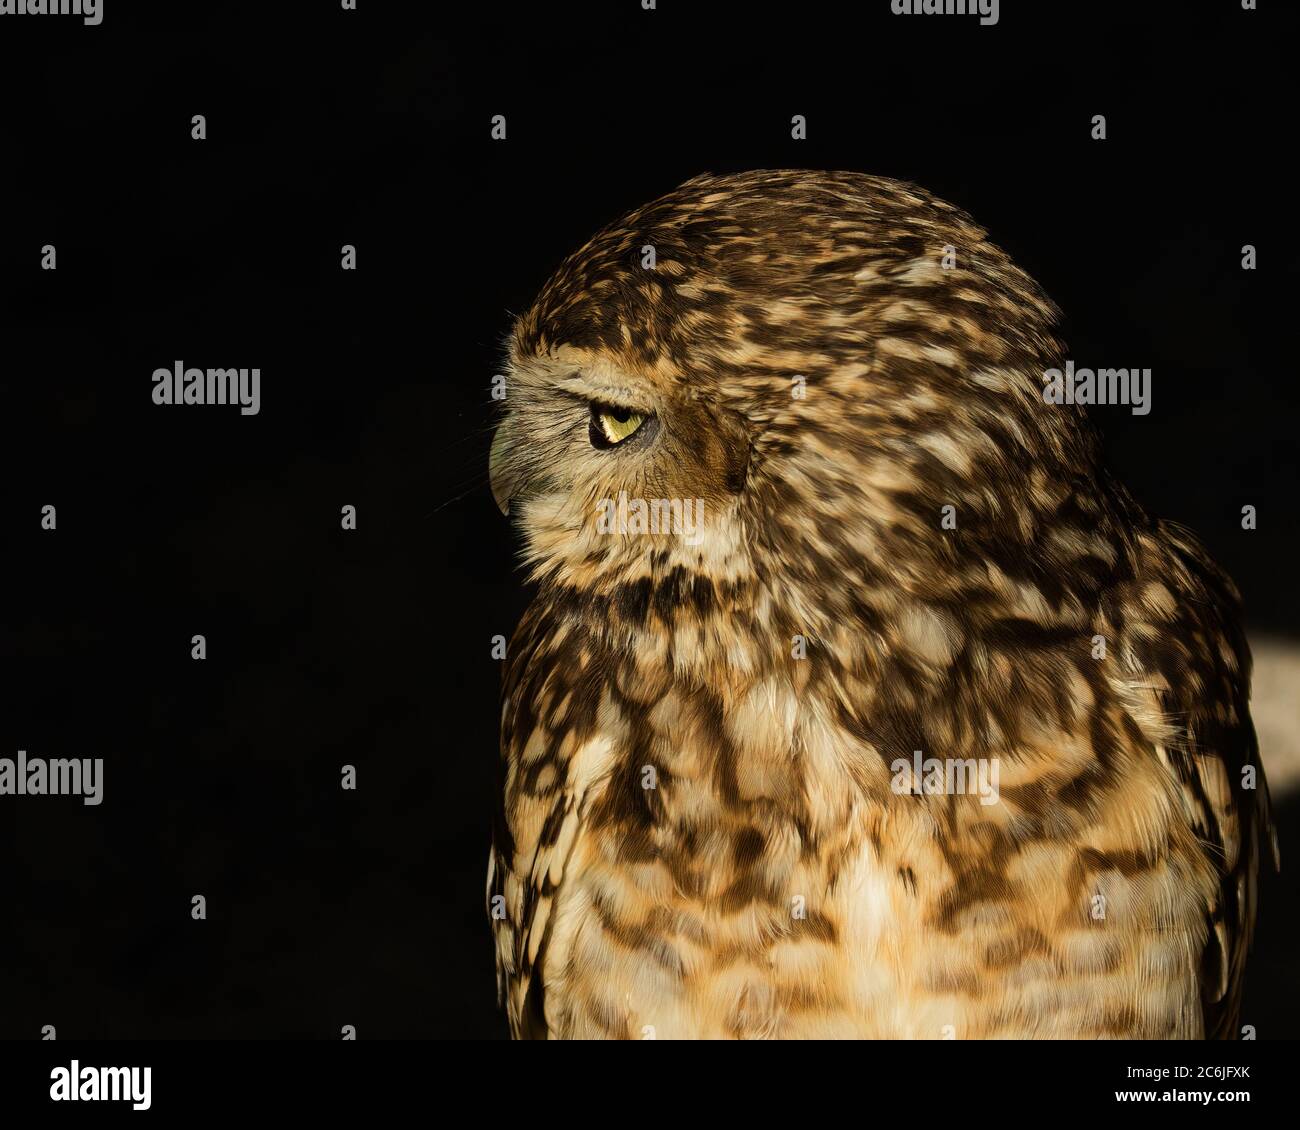 Inquisitive Burrowing Owl, Athene cunicularia, head shot looking to the left against dark background Stock Photo